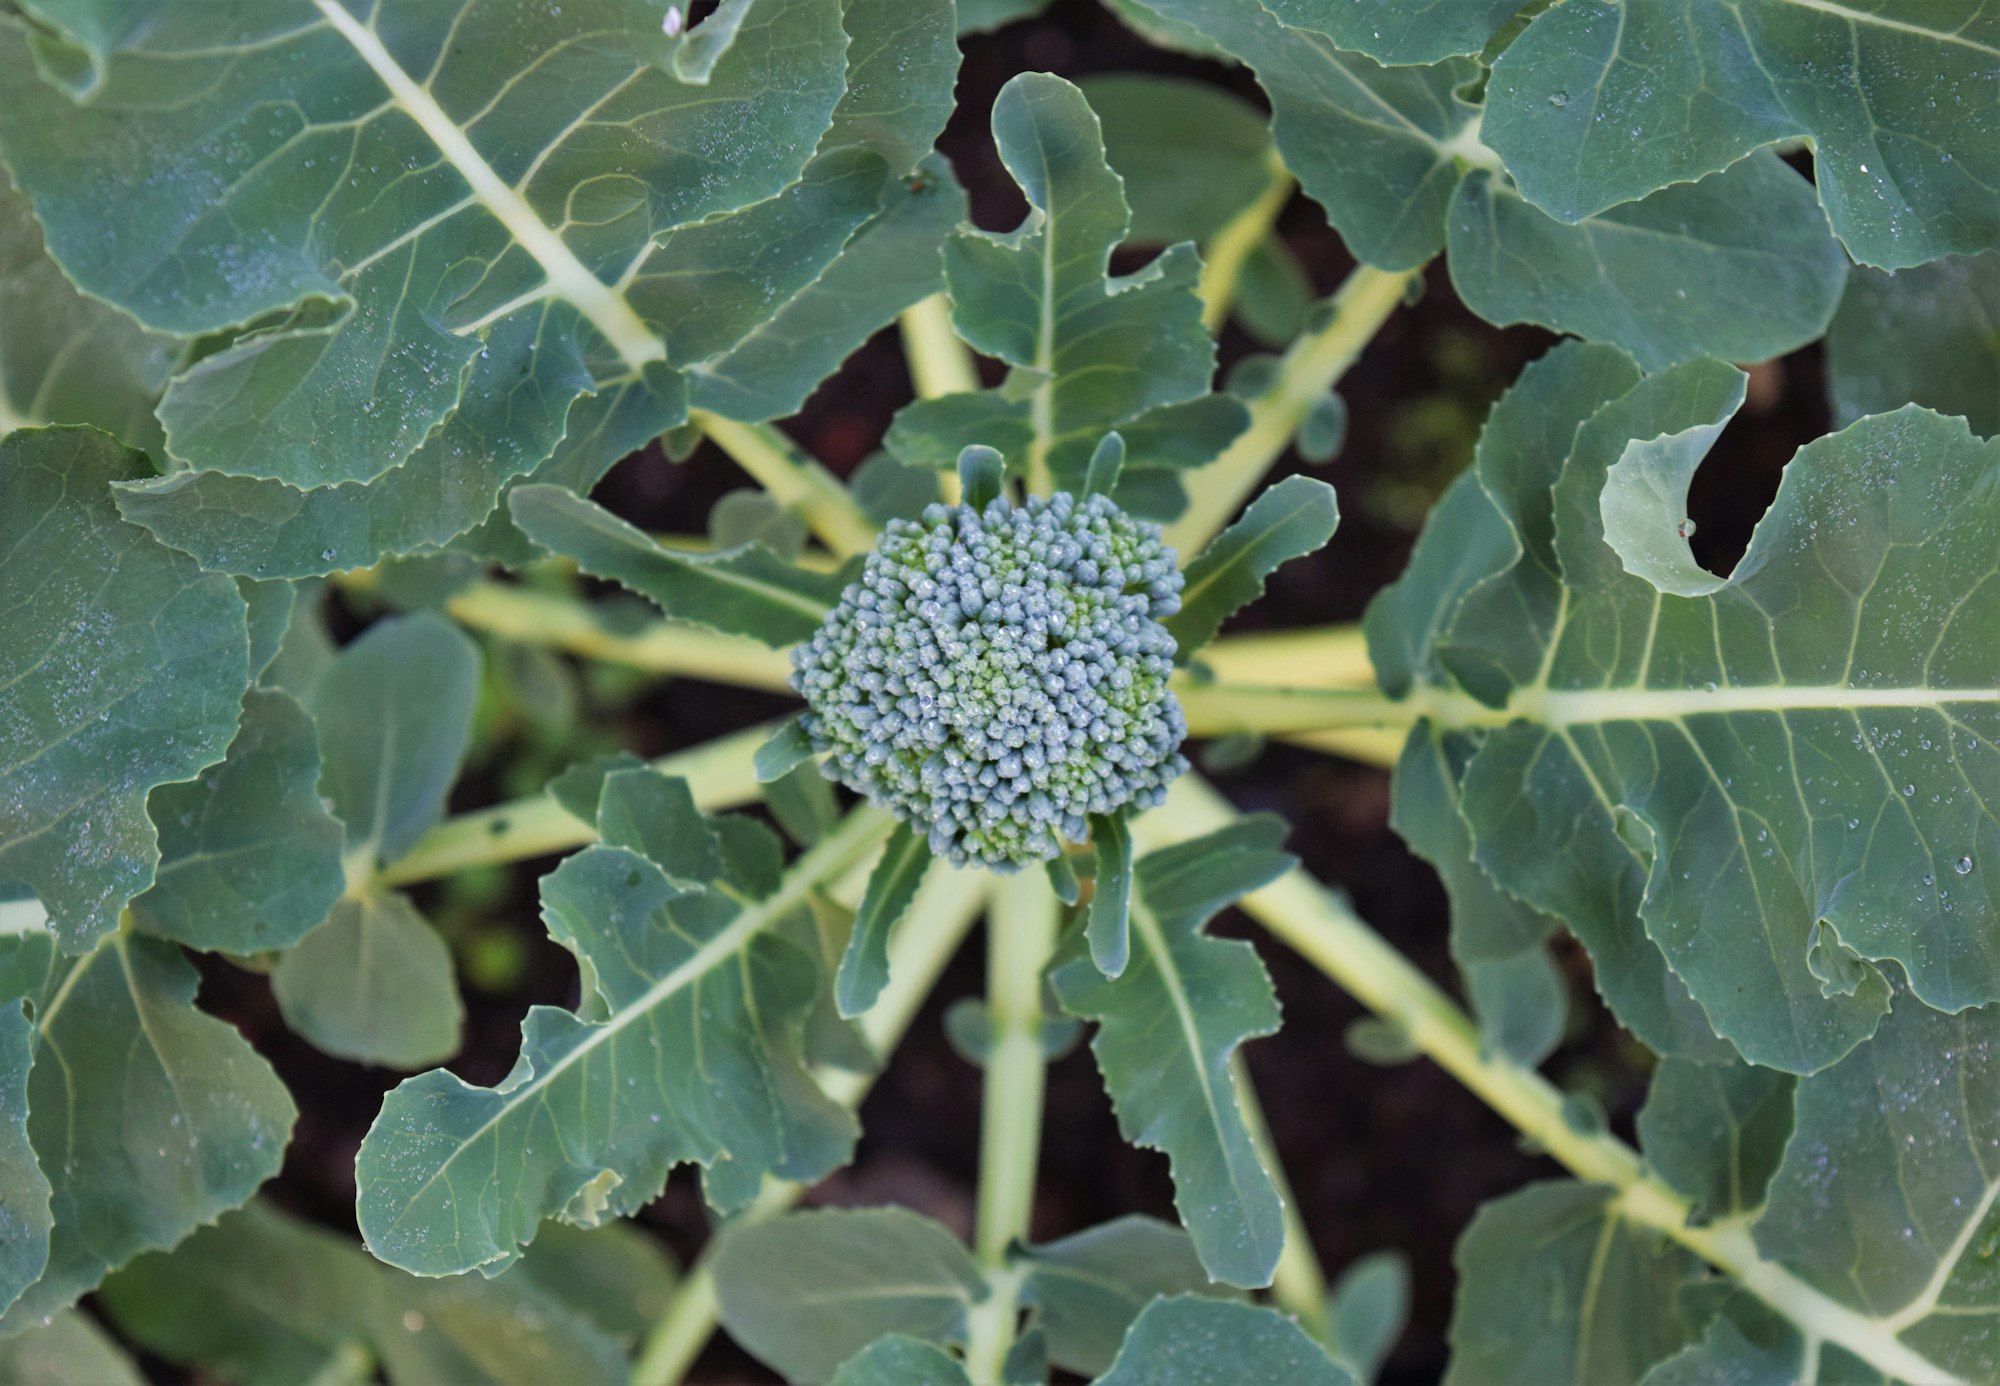 a close up of a broccoli plant with lots of leaves